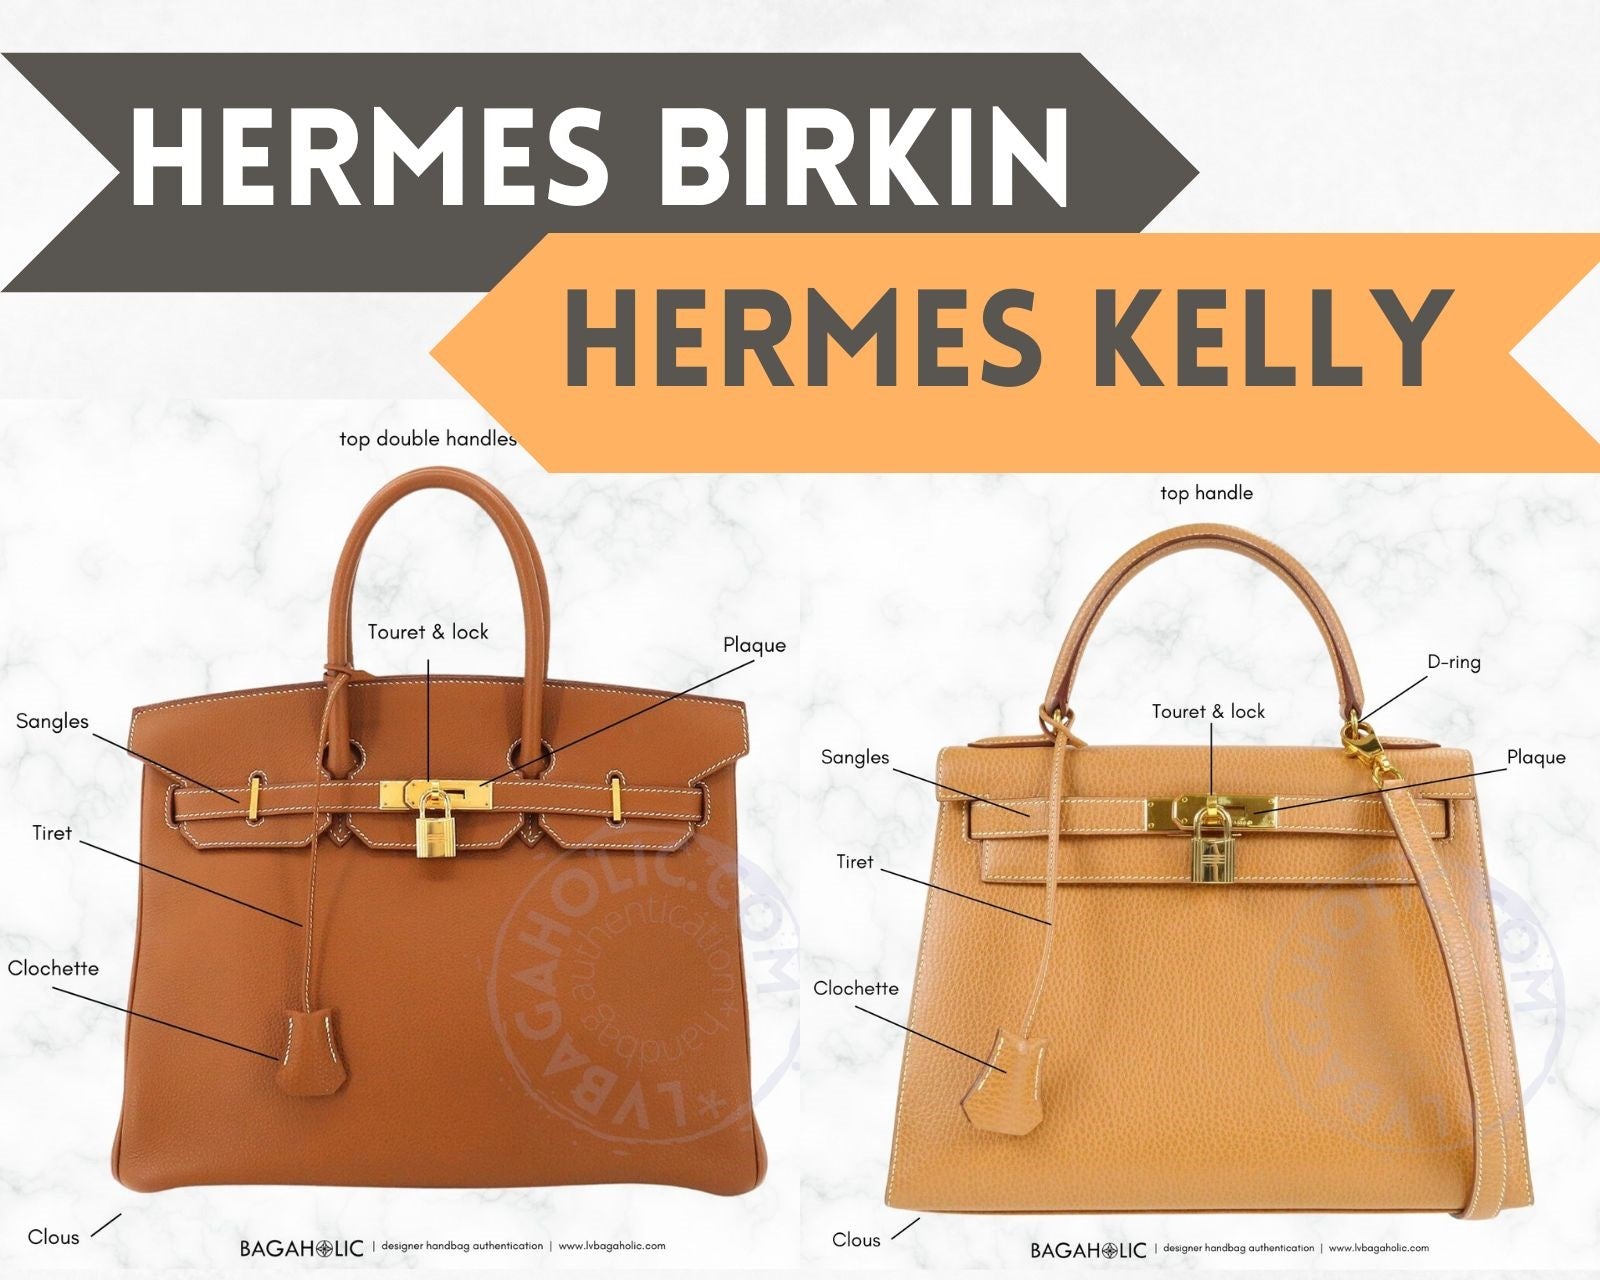 Hermès Kelly Vs Birkin: How Are These Two Iconic Bags Different?